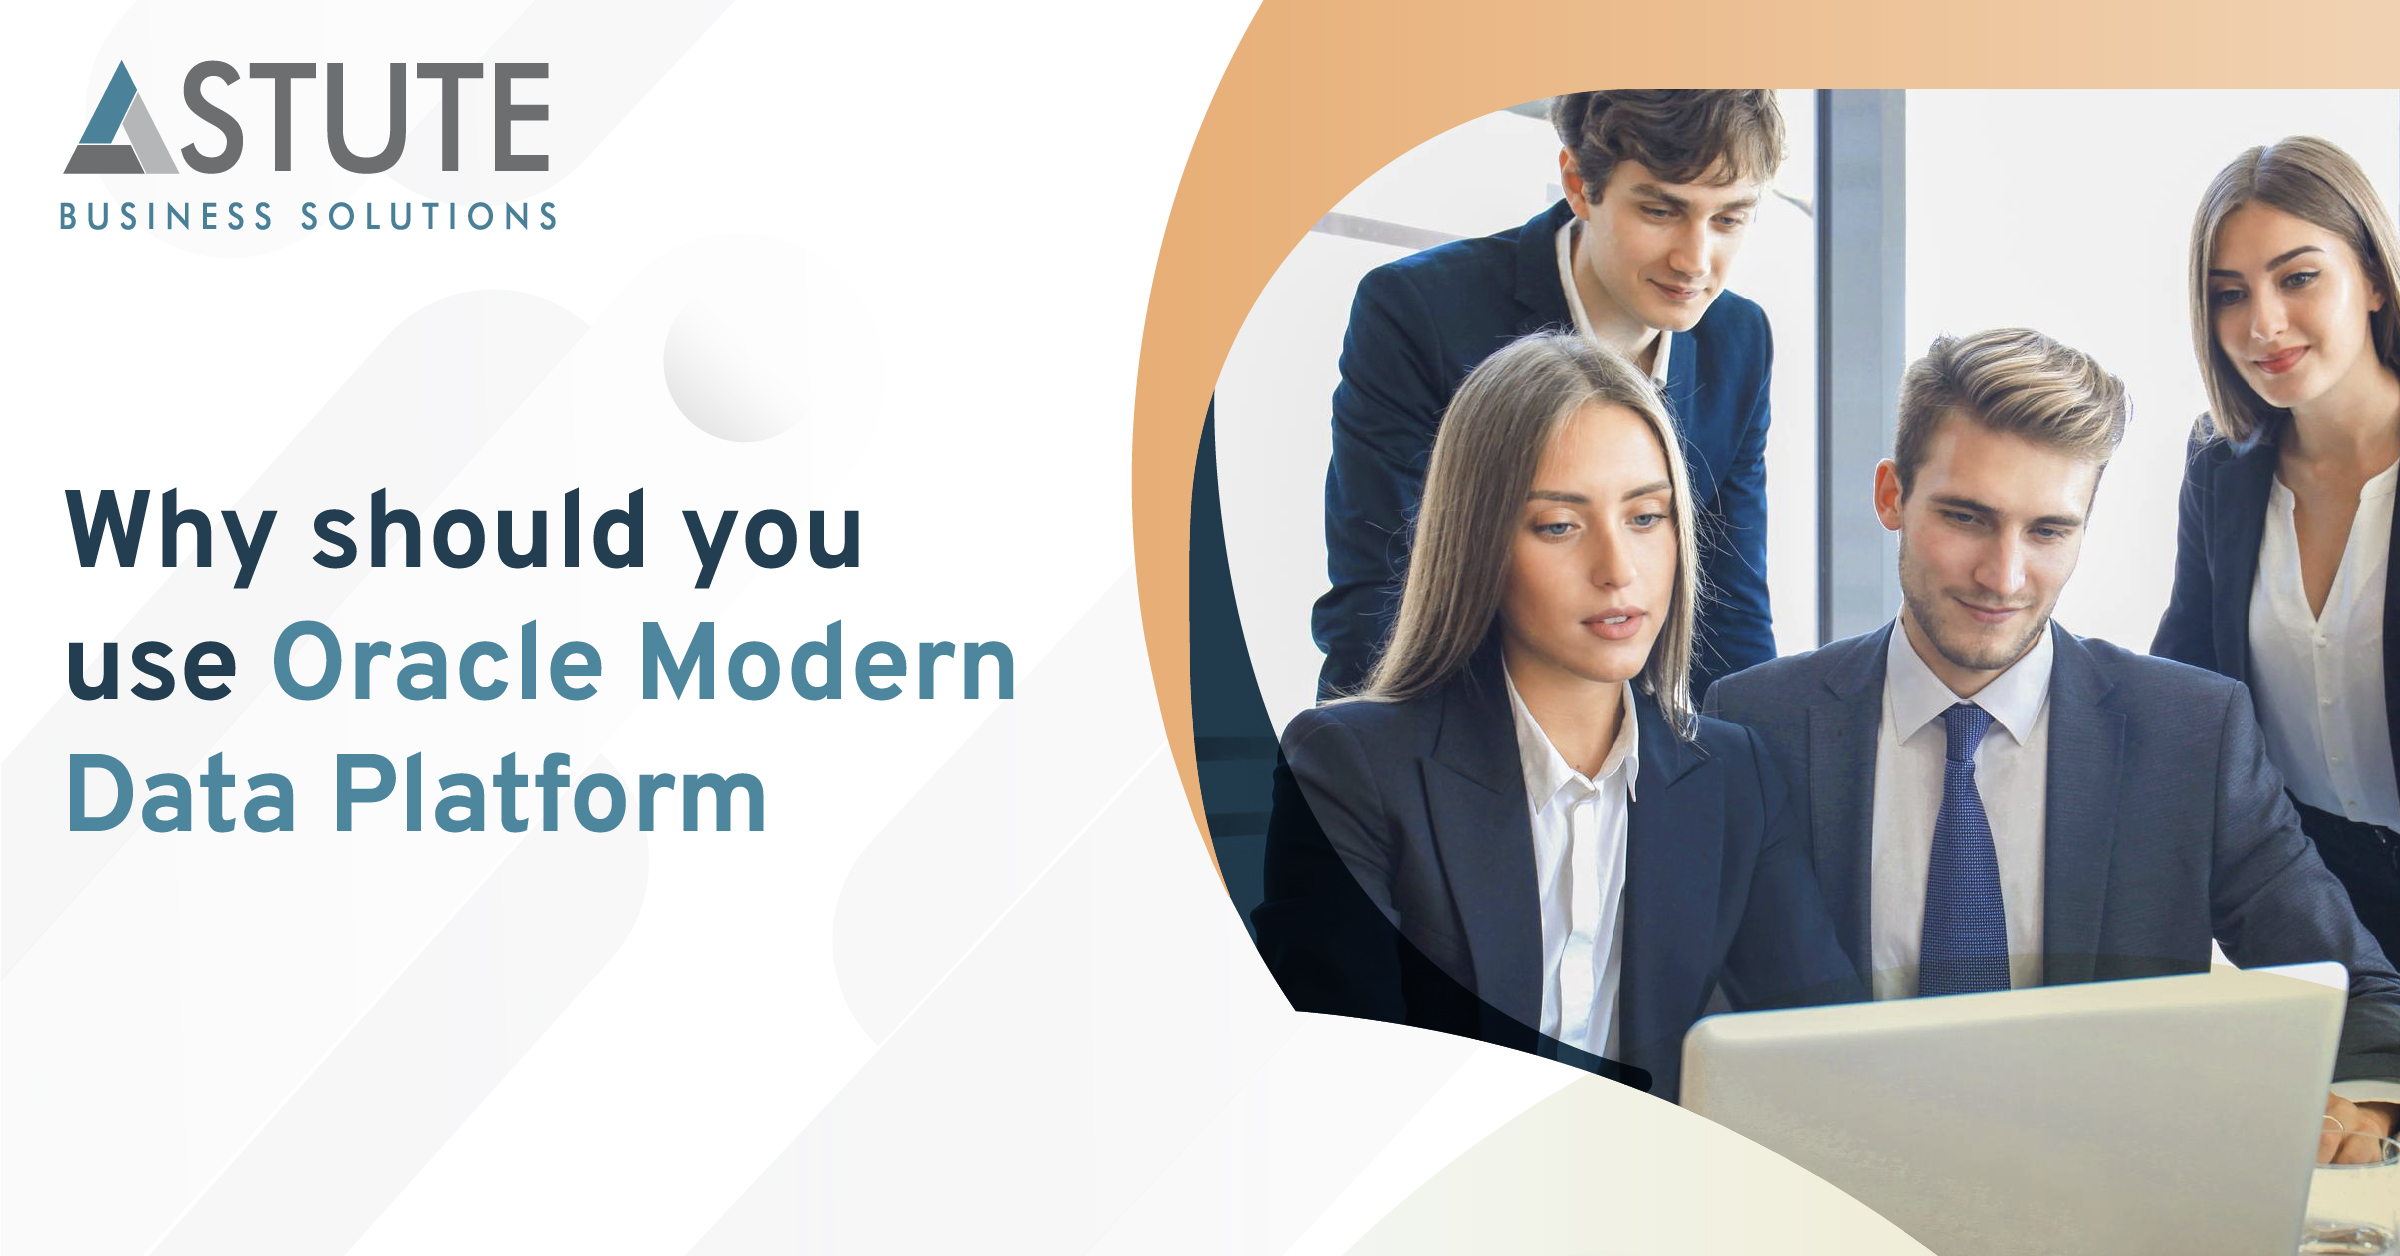 Why should you use Oracle Modern Data Platform